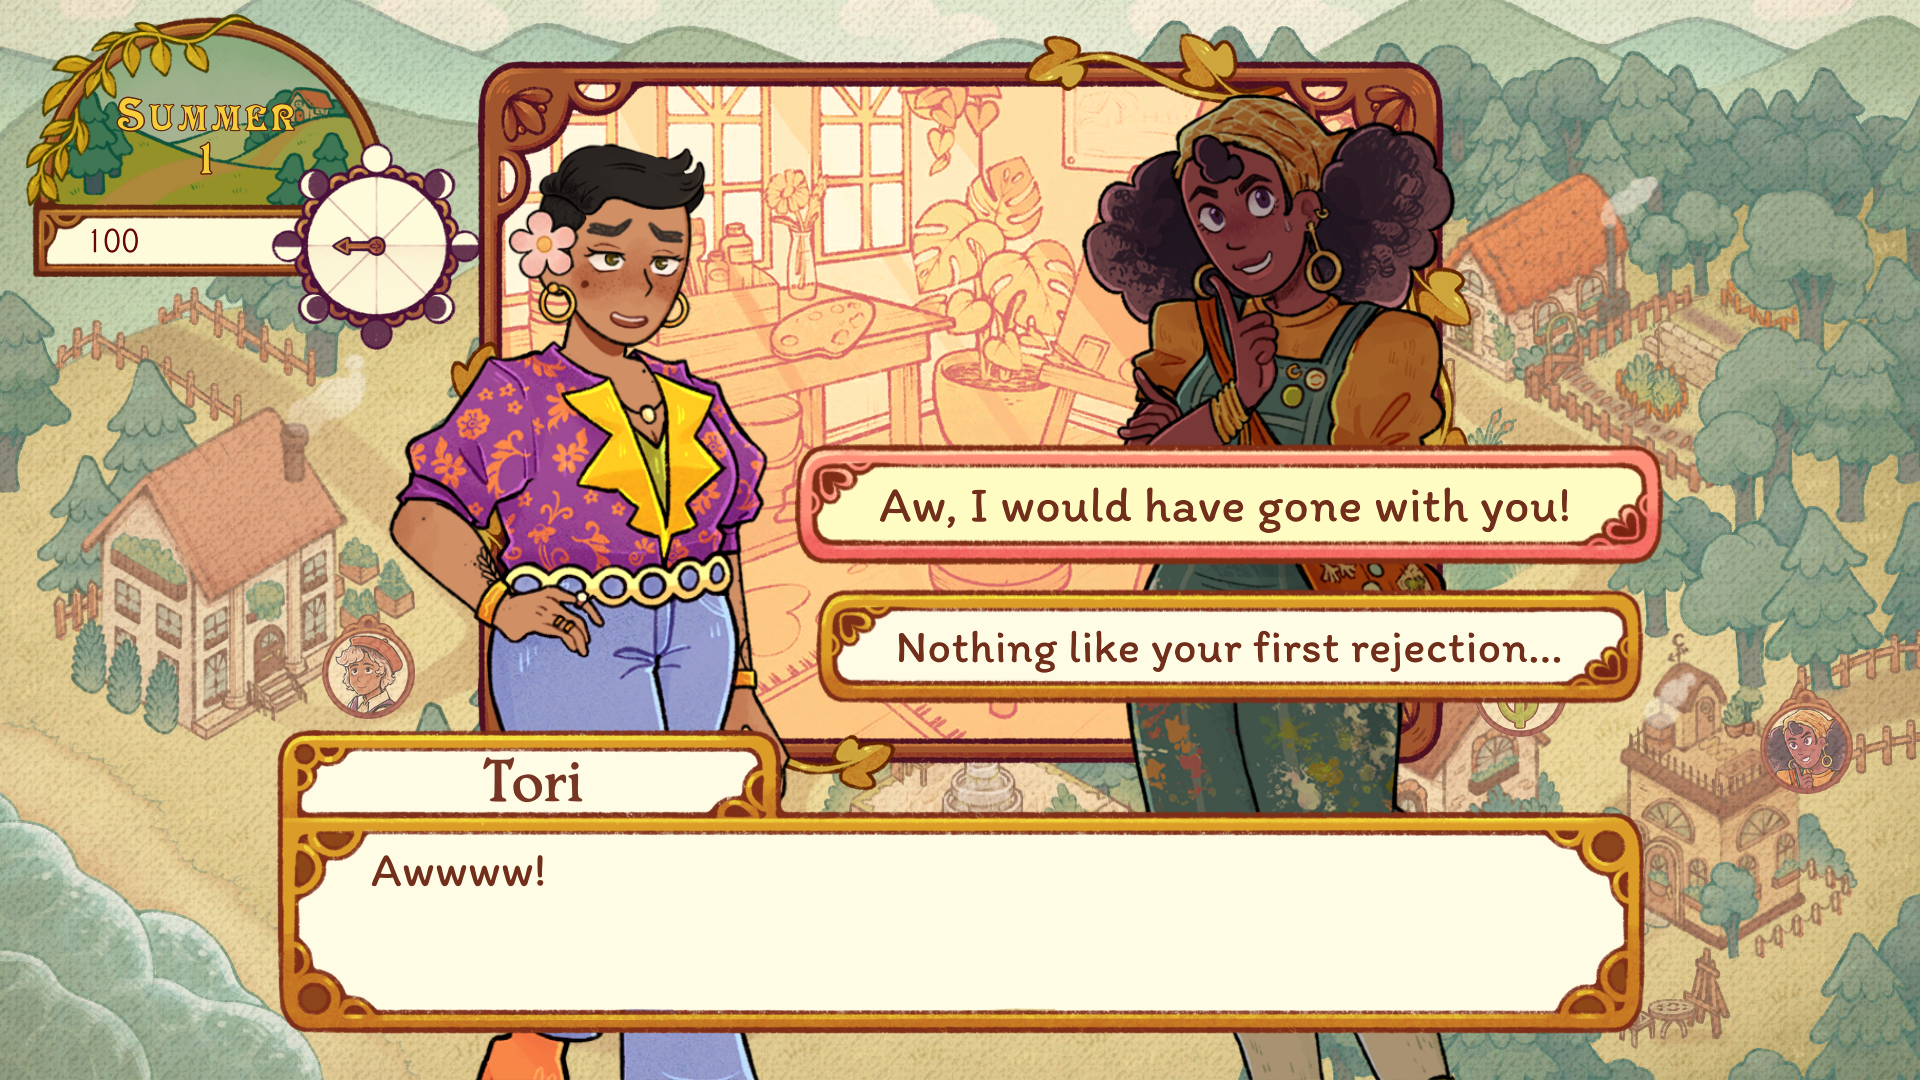 Image is a female witch named Tori saying Awww to another female witch with the choices "Aww I would've gone with you!" and "Nothing like your first rejection!"